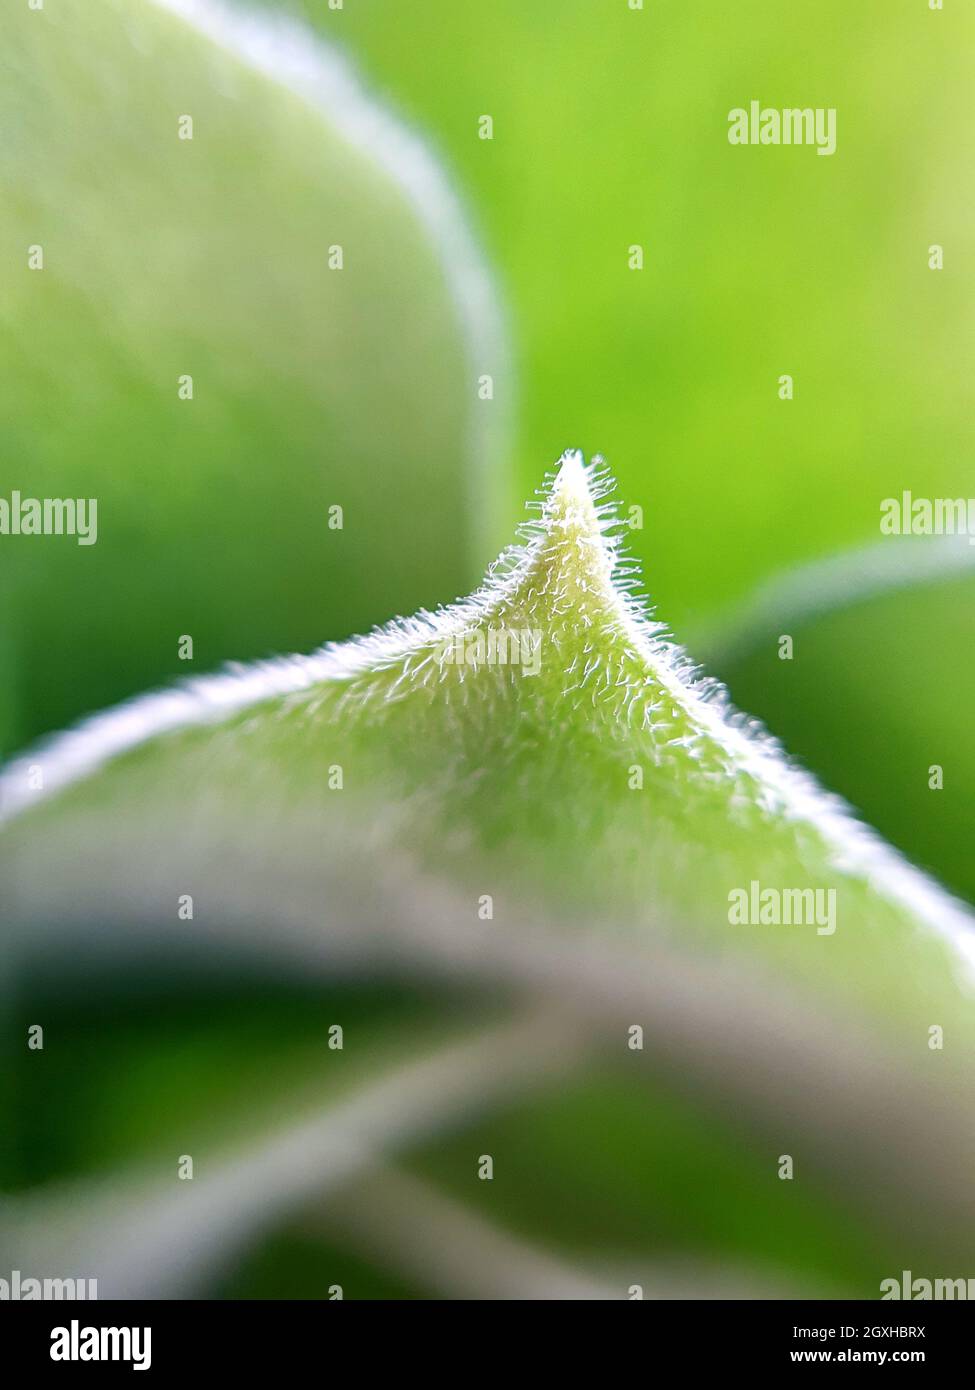 Spring green leaf close up. Leaf texture. Macro nature. Stock Photo